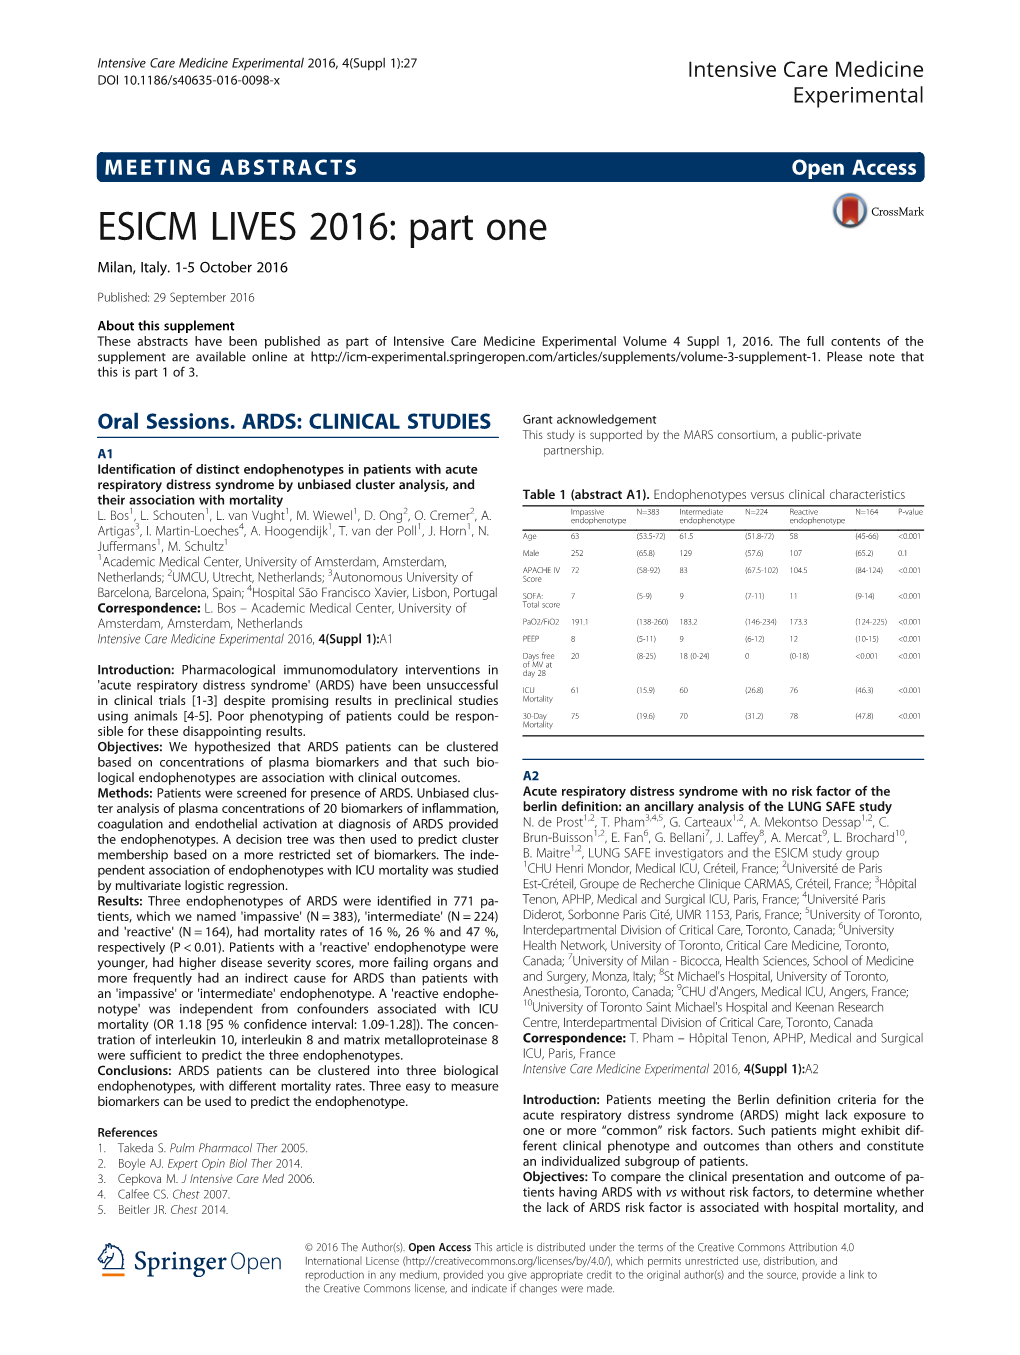 ESICM LIVES 2016: Part One Milan, Italy